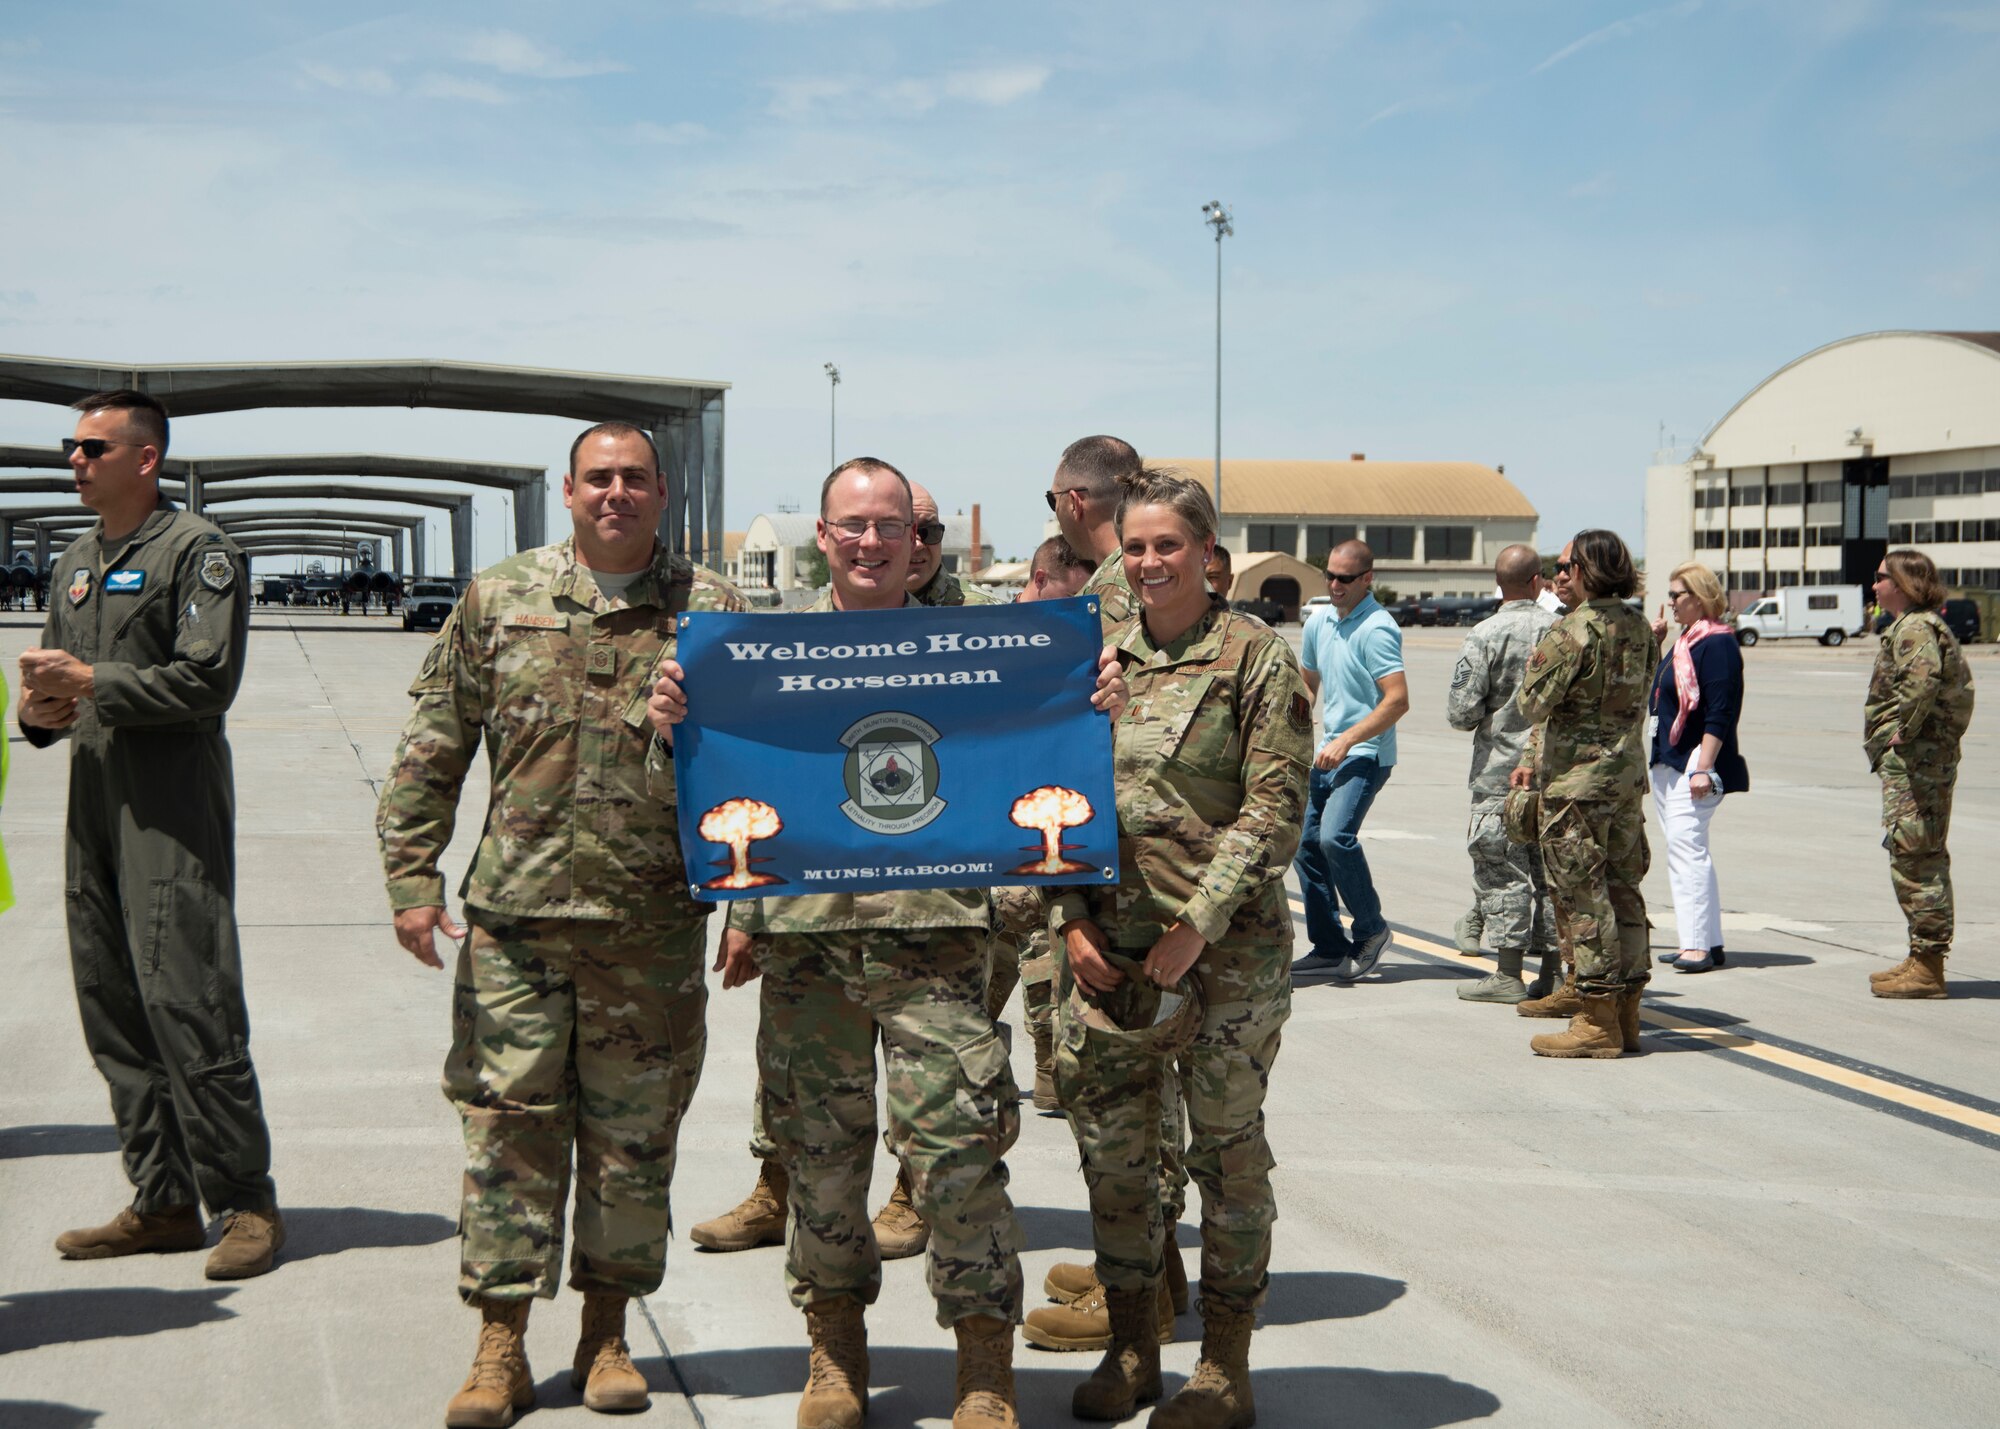 U.S. Air Force Master Sgt. Dan Hansen 366th Munitions Squadron first sergeant (left), Maj. Jonathan Hoefing 366th Munitions Squadron commander (mid), and 2nd Lt. Callie Welch 366th Munitions Squadron flight commander (right) pose for a photo with a welcome home poster June 3, 2020, at Mountain Home Air Force Base, Idaho. The poster is for the return of the 389th Fighter Squadron after an 8-month long deployment. (U.S. Air Force photo by Airman 1st Class Akeem K. Campbell)